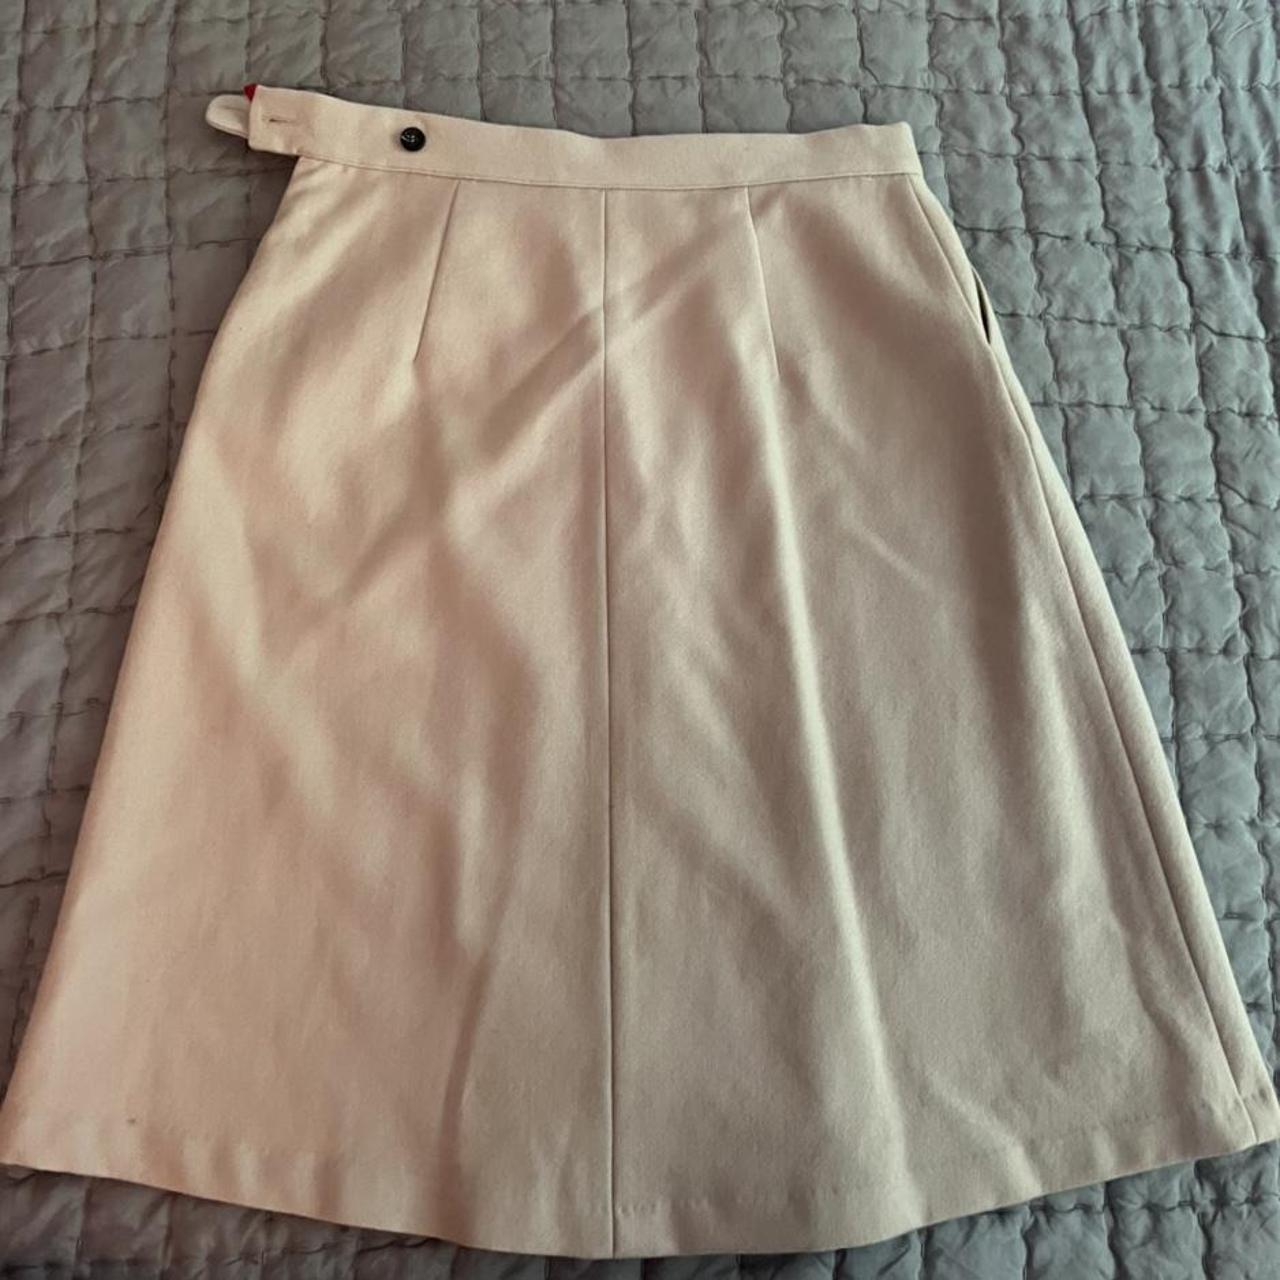 Product Image 2 - vintage pleated skirt! perfect for